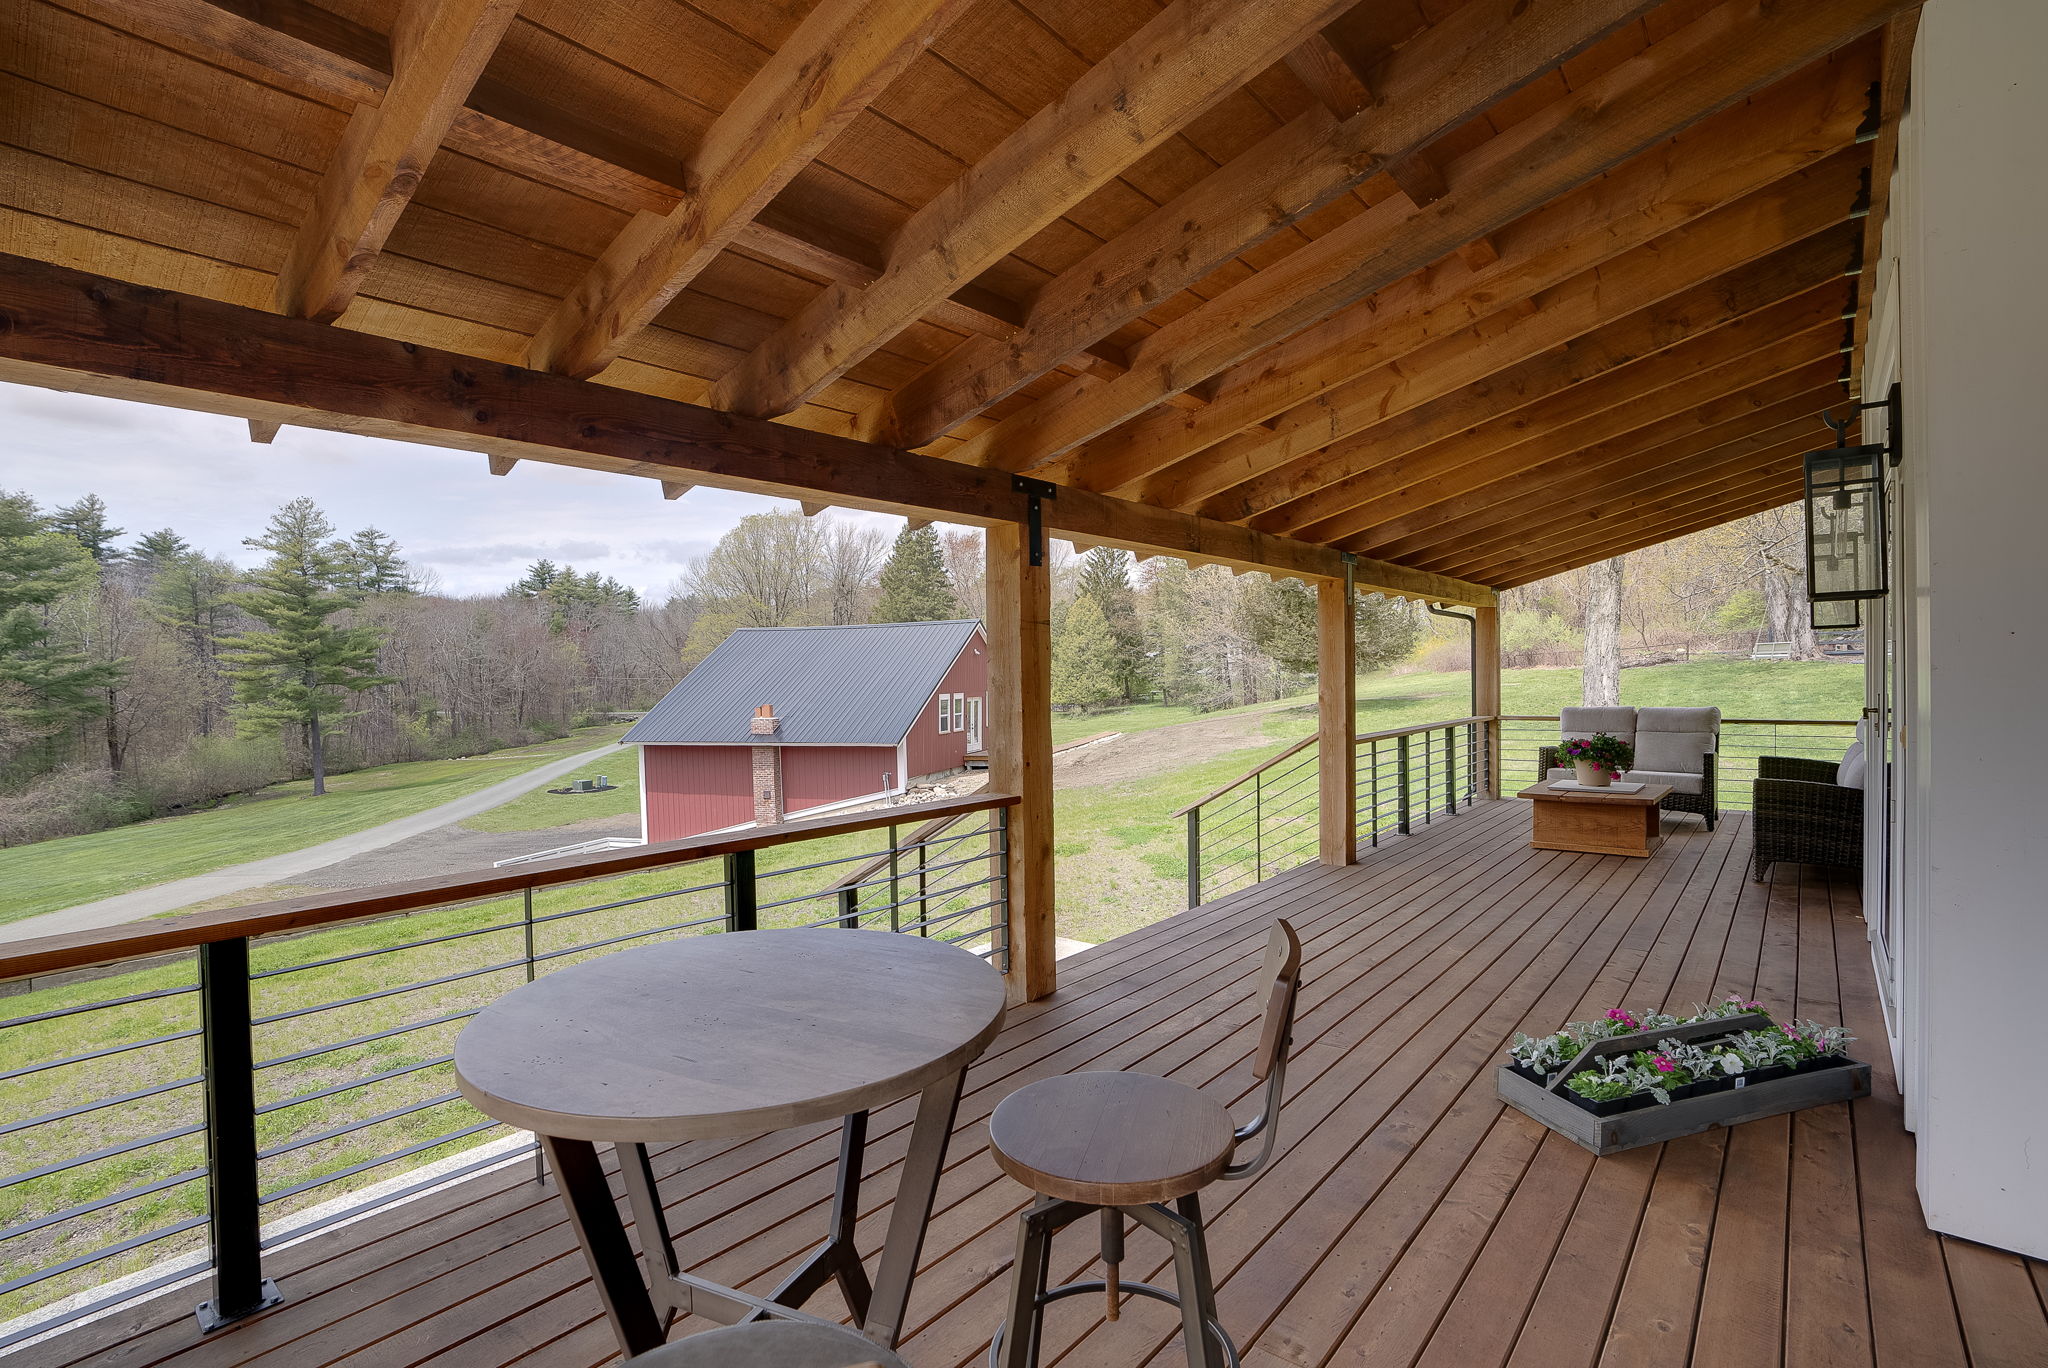 Expansive outdoor space designed for entertaining with views of the rustic barn and pond